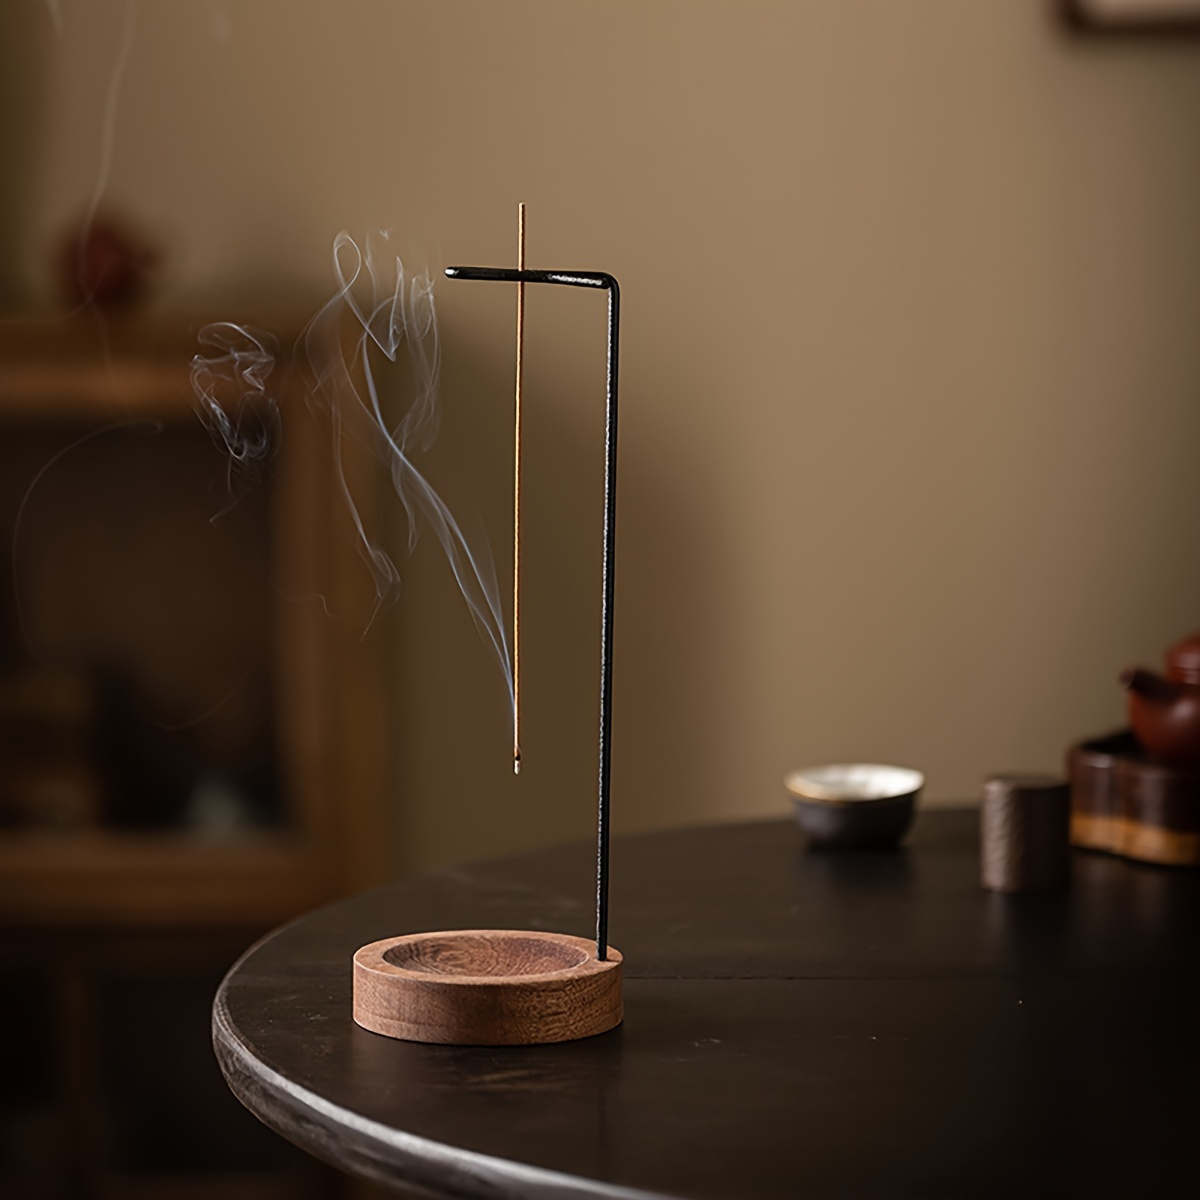 

1pc Metal Hanging Incense Holder, Enhance Your Zen Home Decor With A Creative Line Incense Burner, Perfect Aromatherapy Gift And Ornament For A Serene Indoor Ambiance